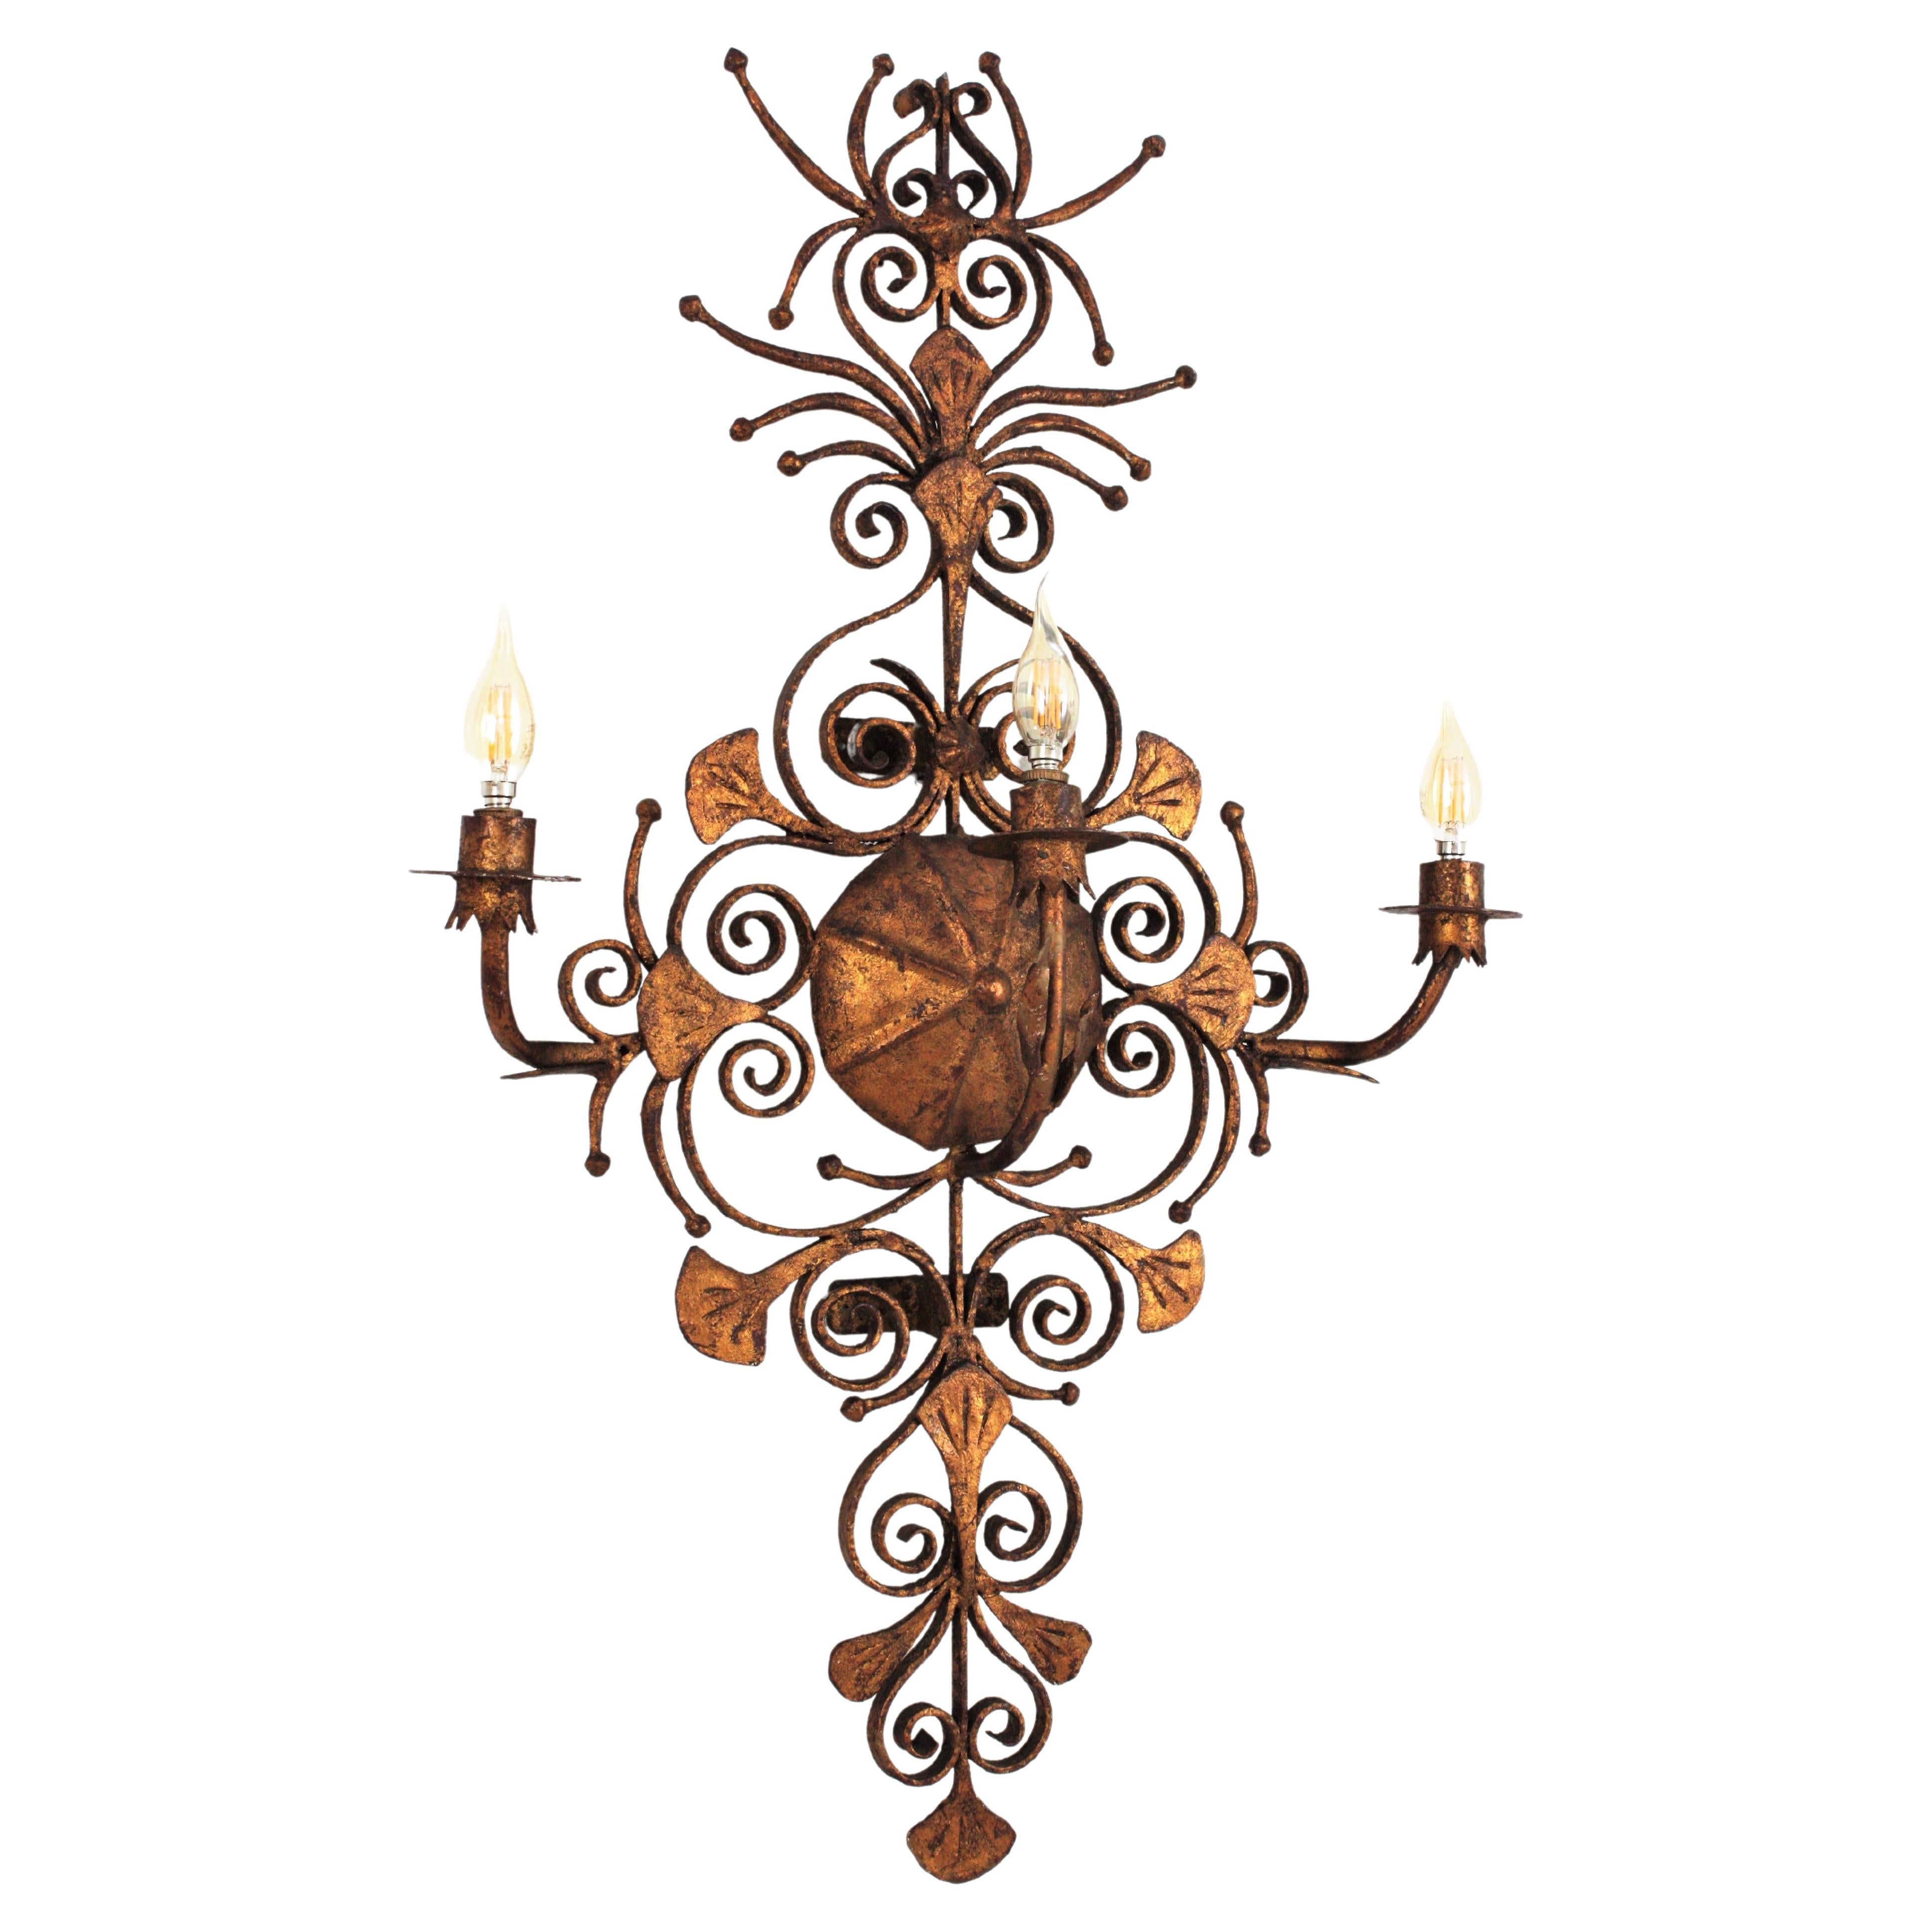 Outstanding Hand Forged Scrollwork three light wall sconce. Spain, 1940s
This monumental wall sconce was handcrafted with an excellent metal work and Gothic / medieval inspiration. The backplate has a heavily detailed iron scrollwork, all made by